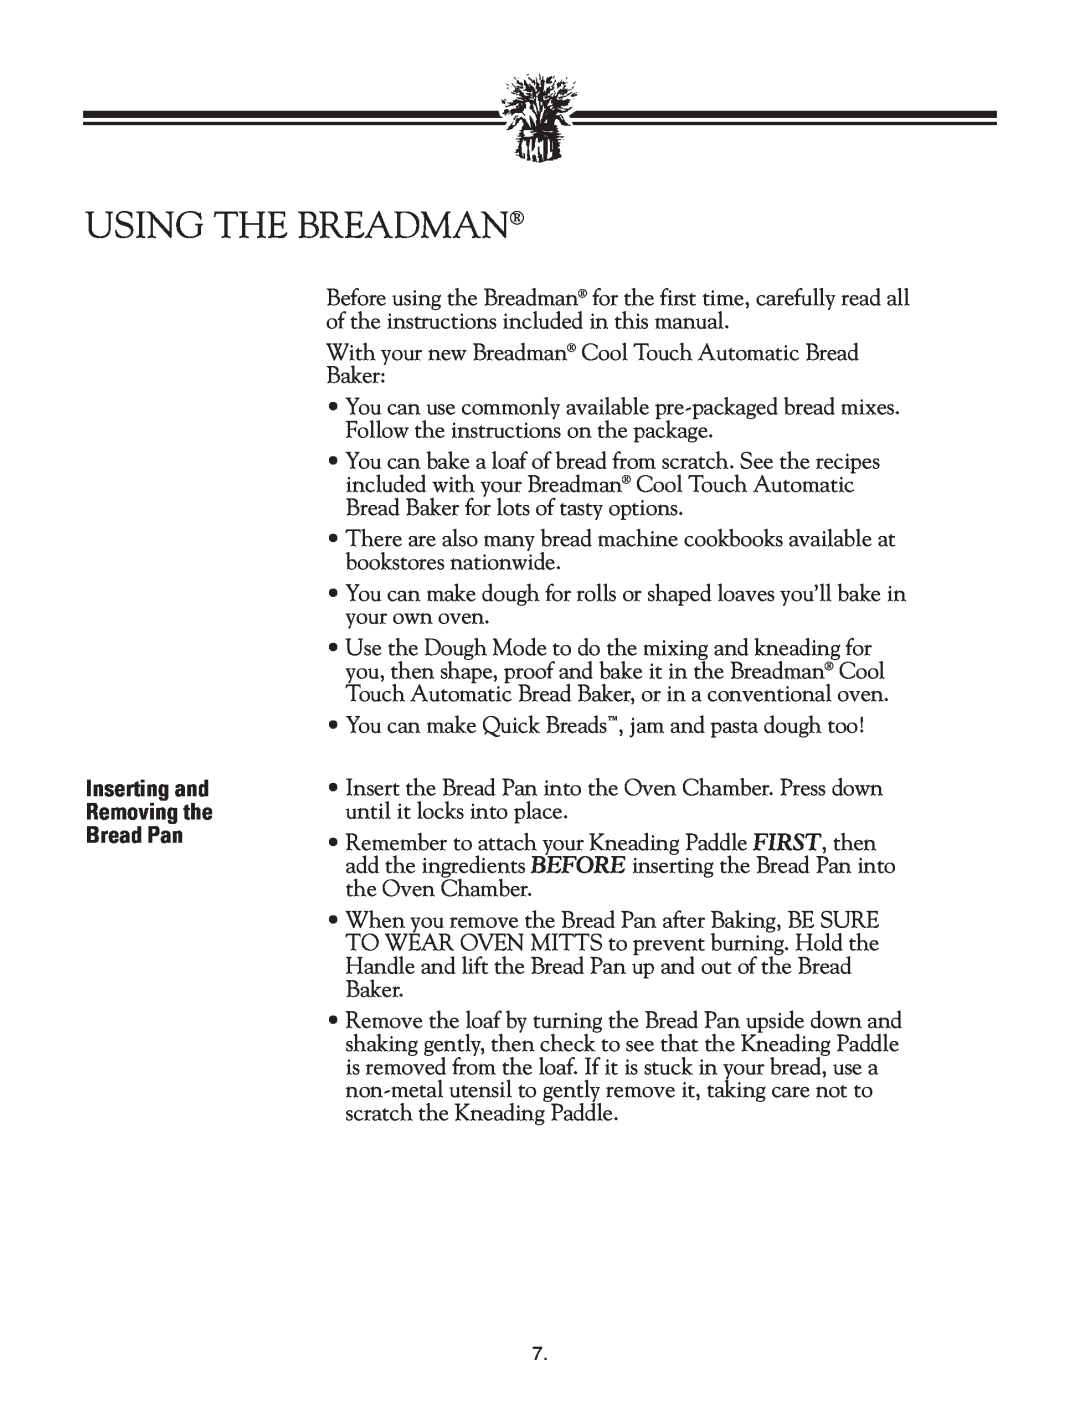 Breadman TR2828G instruction manual Using The Breadman, Inserting and Removing the Bread Pan 